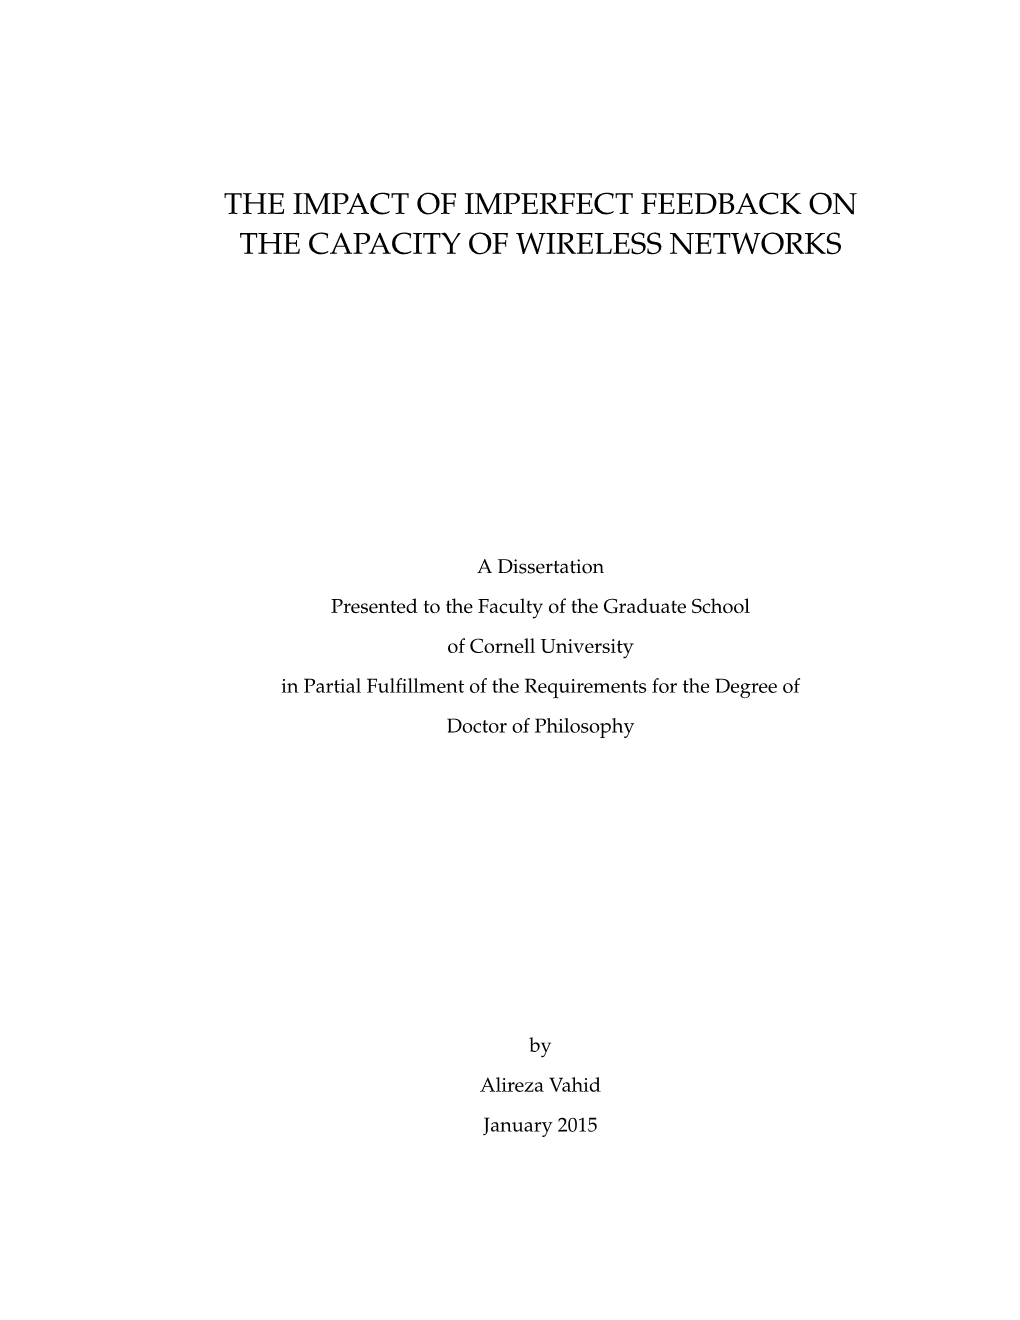 The Impact of Imperfect Feedback on the Capacity of Wireless Networks